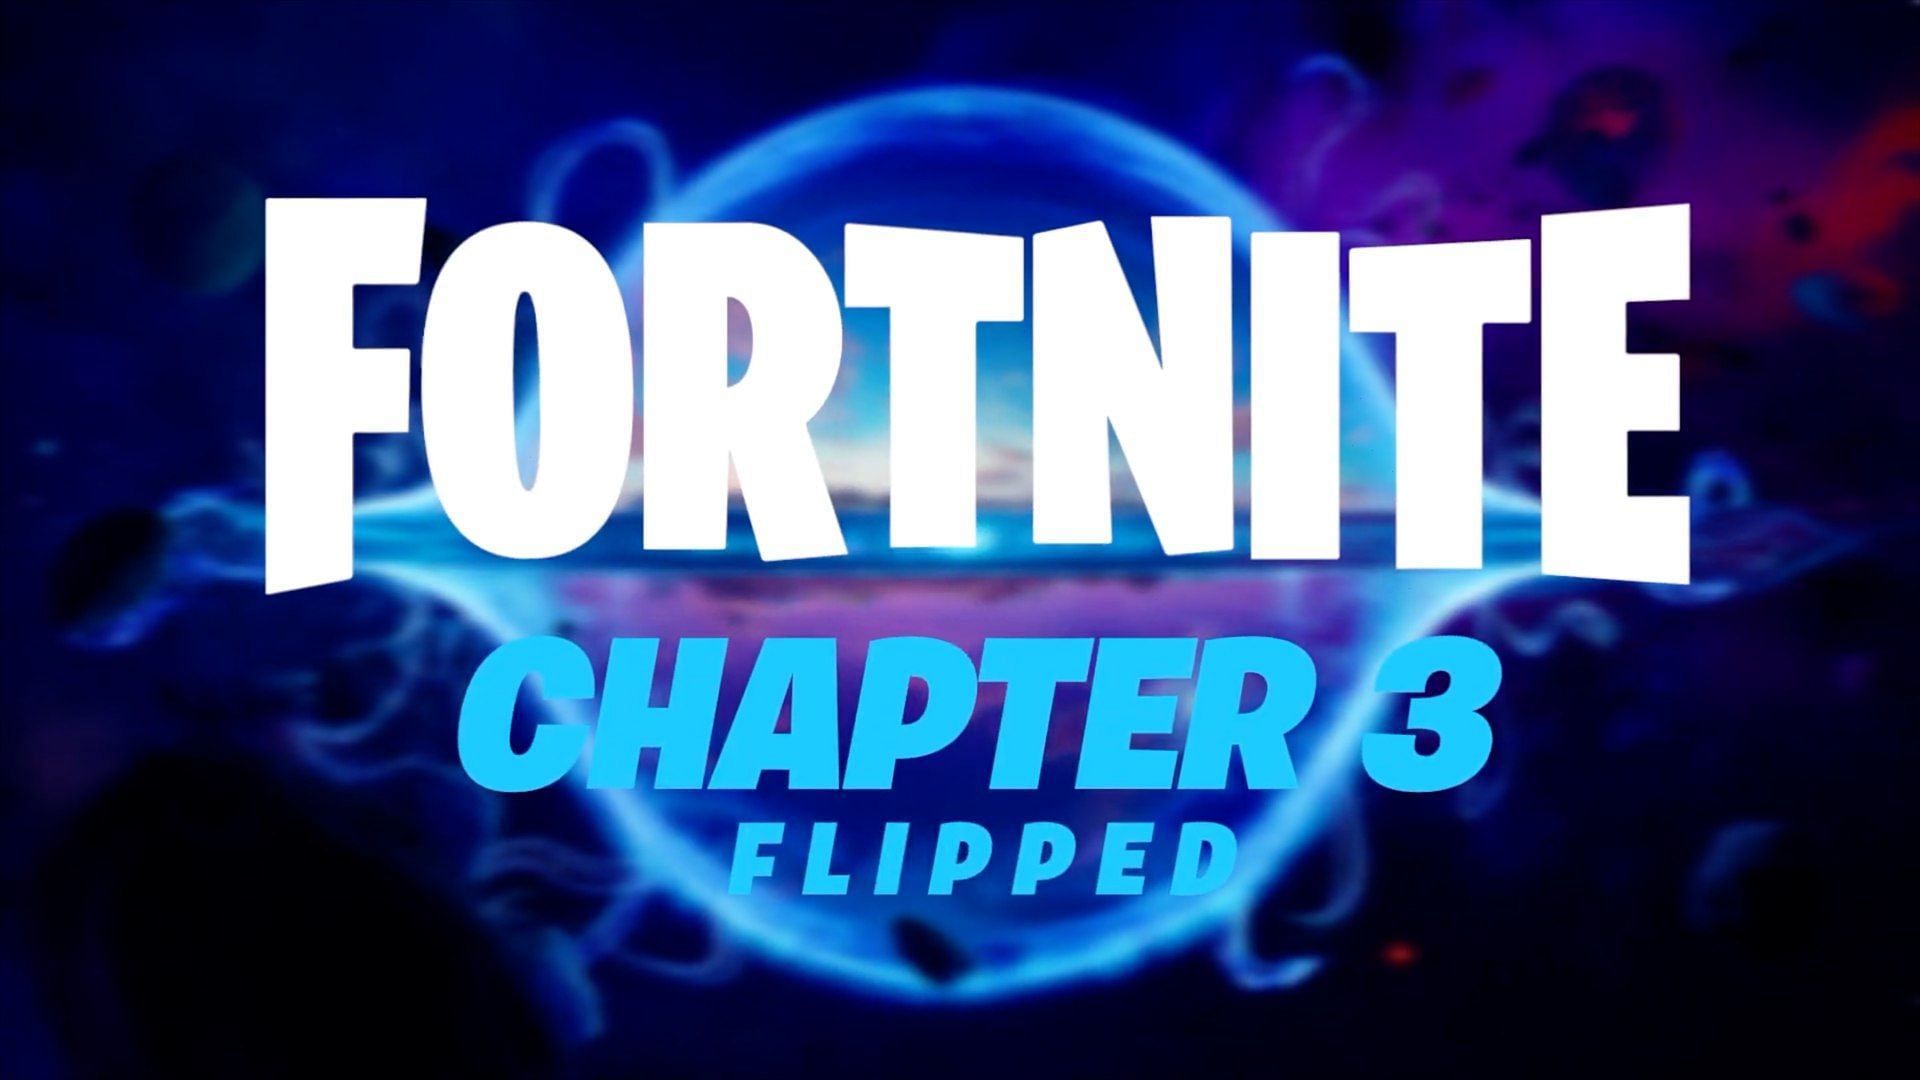 From &quot;Hyped&quot; to &quot;Disappointed&quot;, players have mixed reactions about Fortnite Chapter 3 (Image via Epic Games/Fortnite)